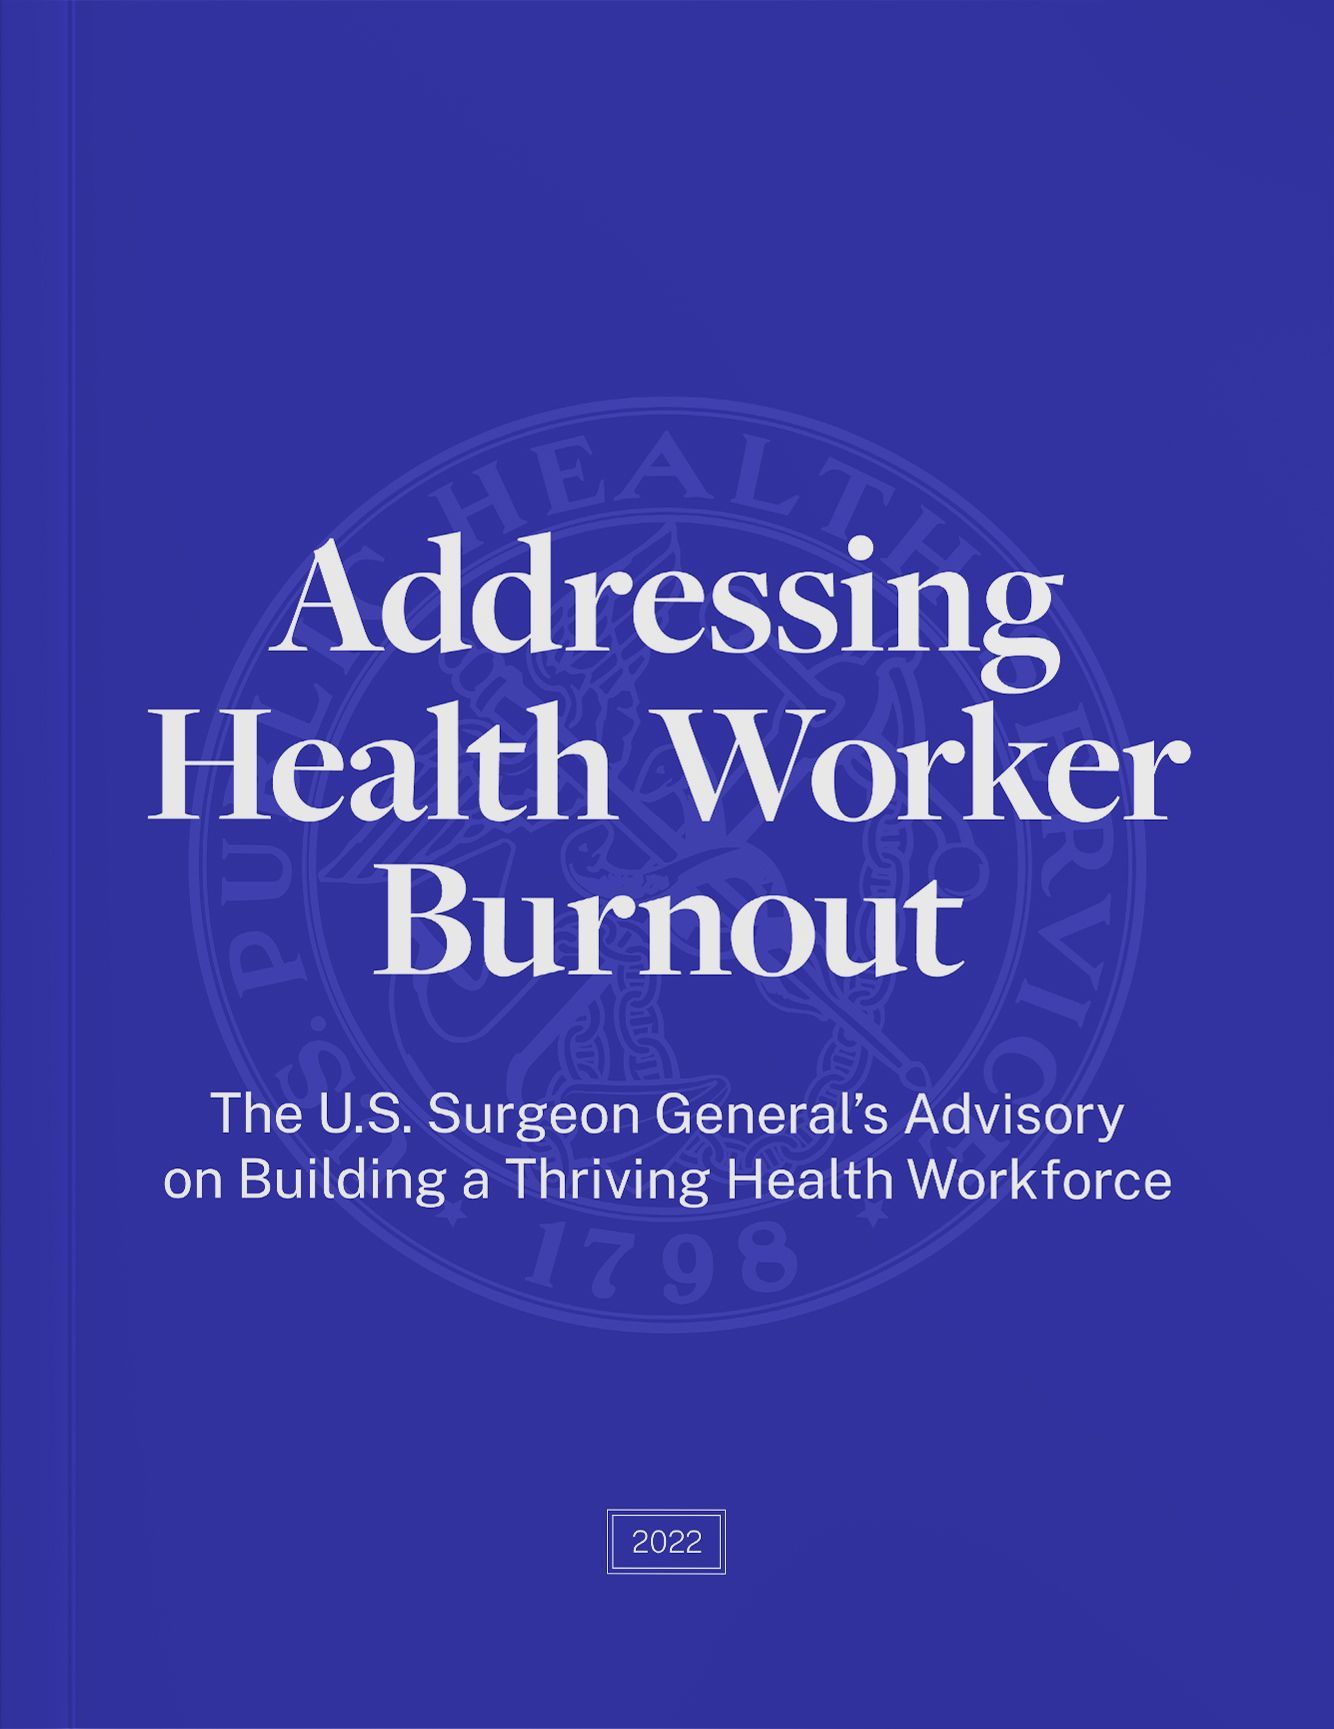 The Health Worker Burnout advisory cover sheet, titled Addressing Health Worker Burnout, The U.S. Surgeon General's Advisory on Building a Thriving Health Workforce, 2022